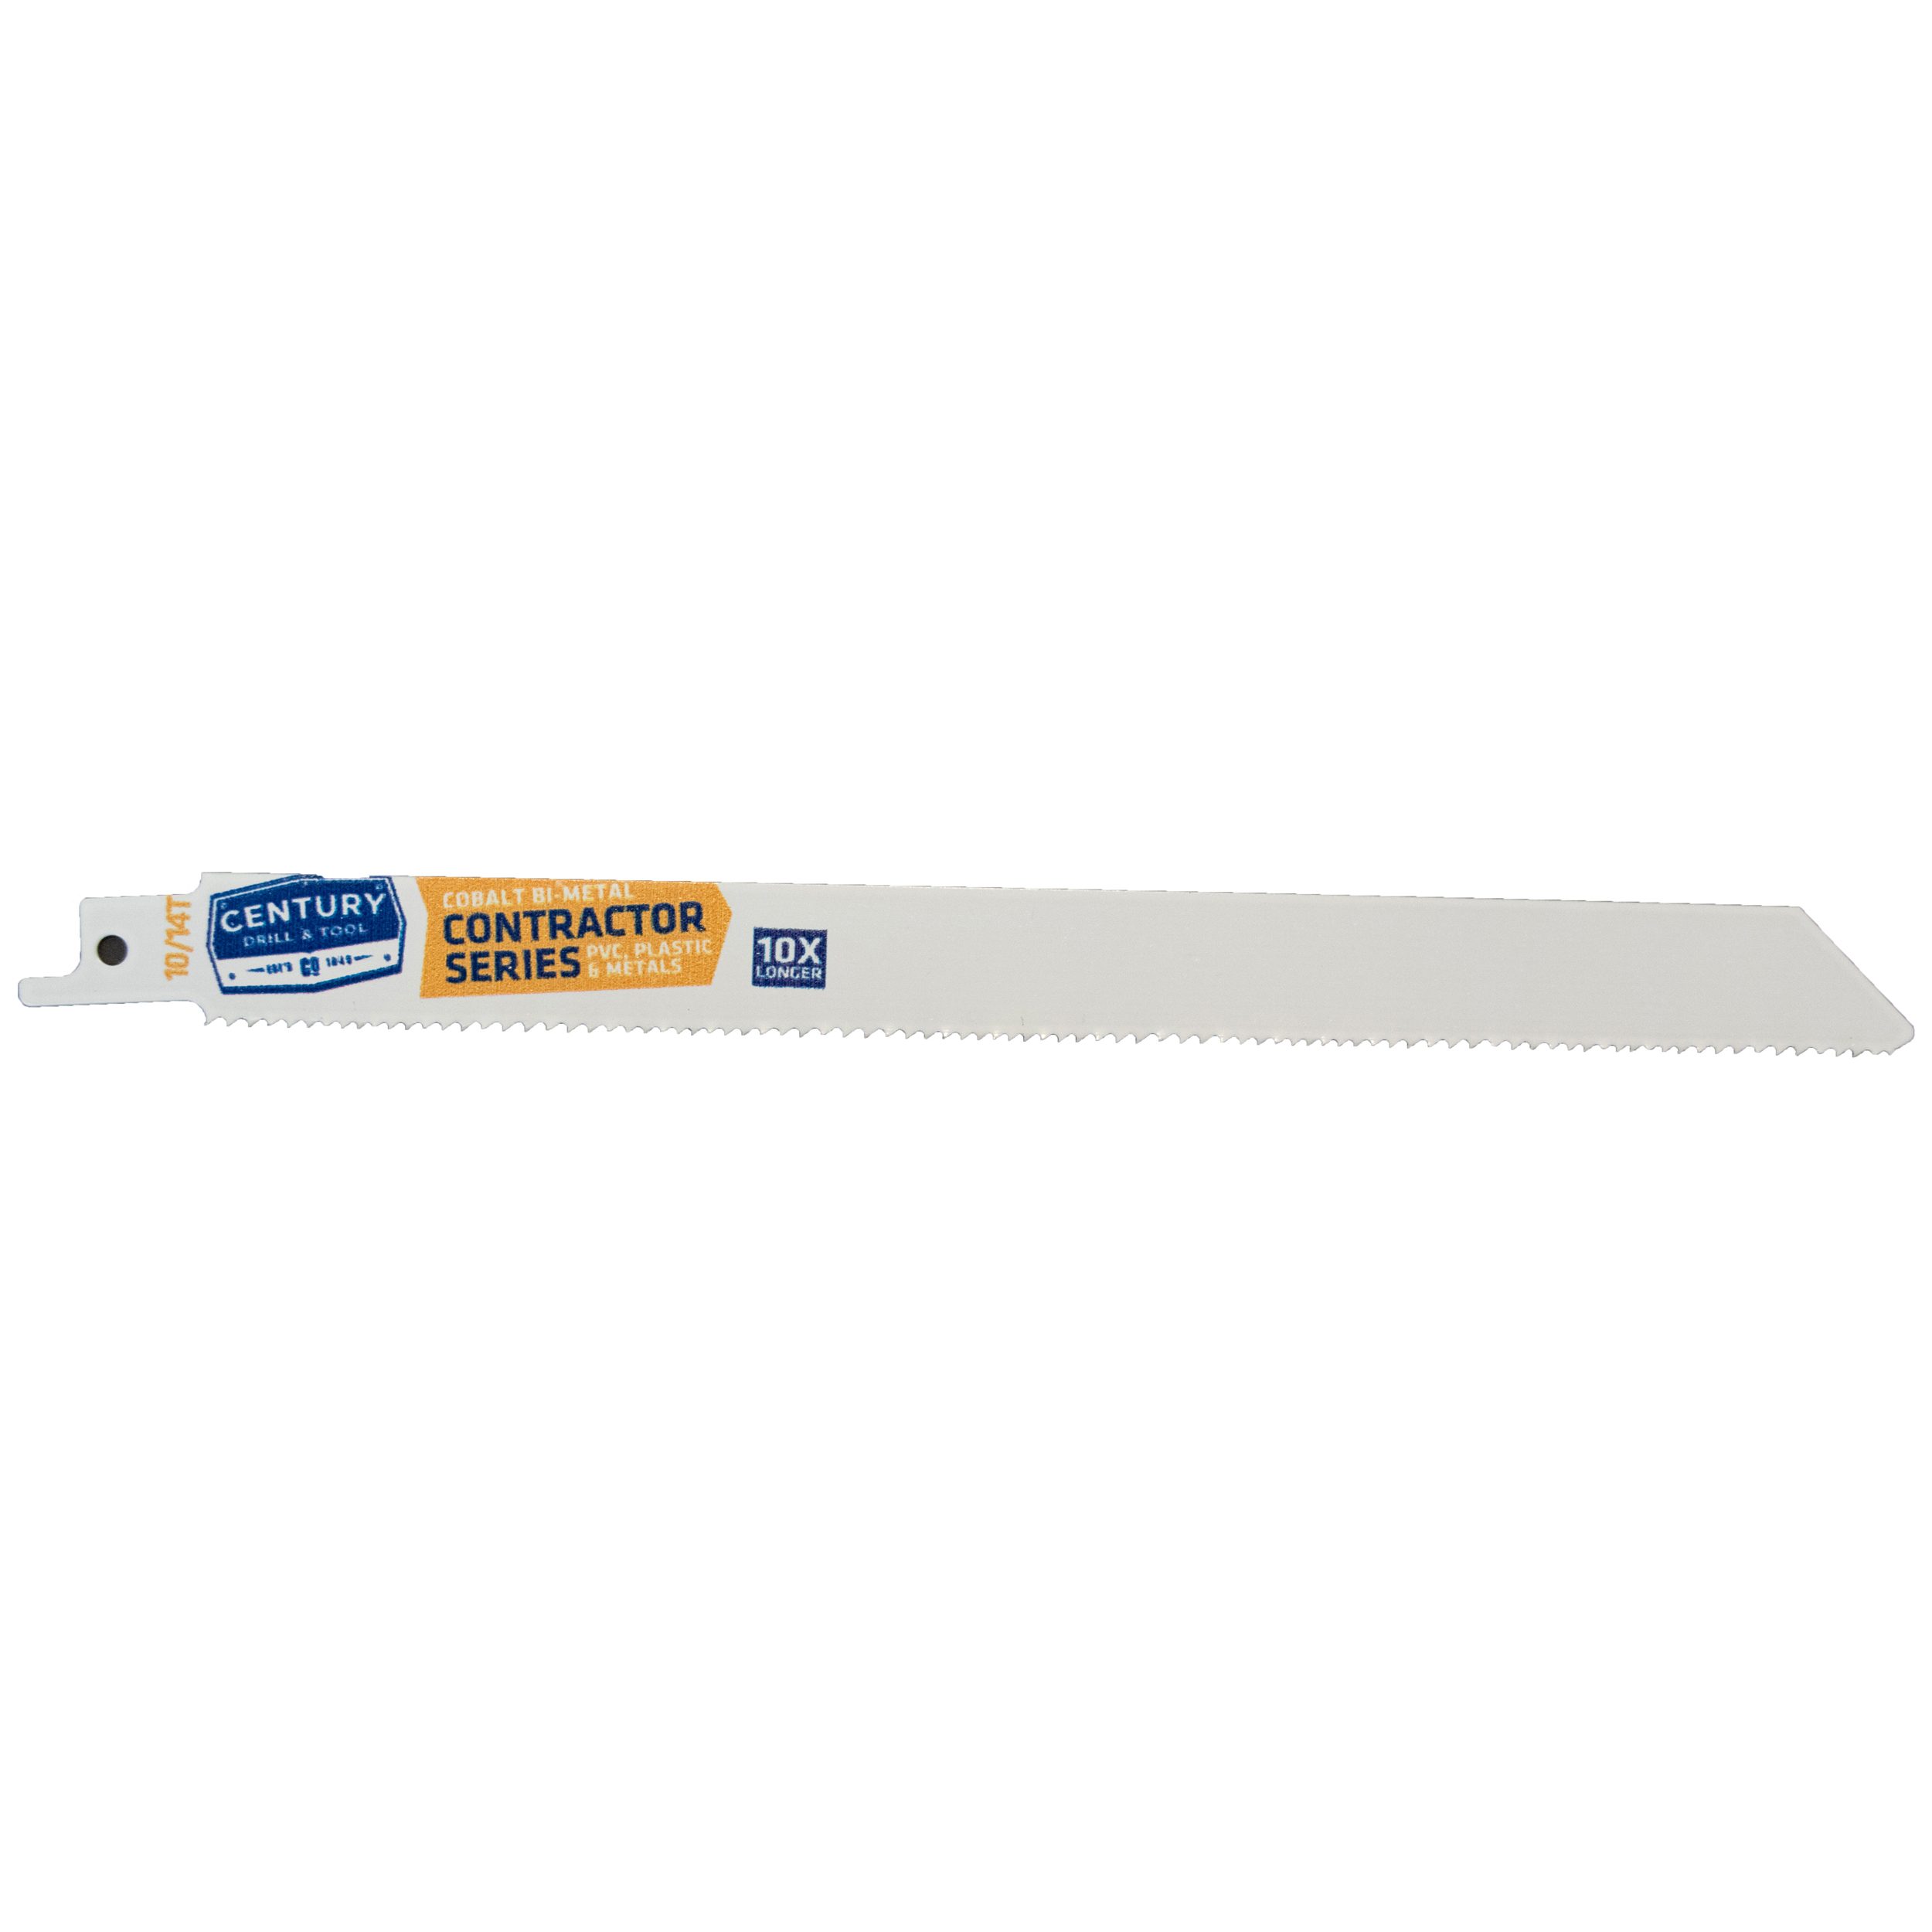 Contractor Series Reciprocating Saw Blade 10/14T X 9″